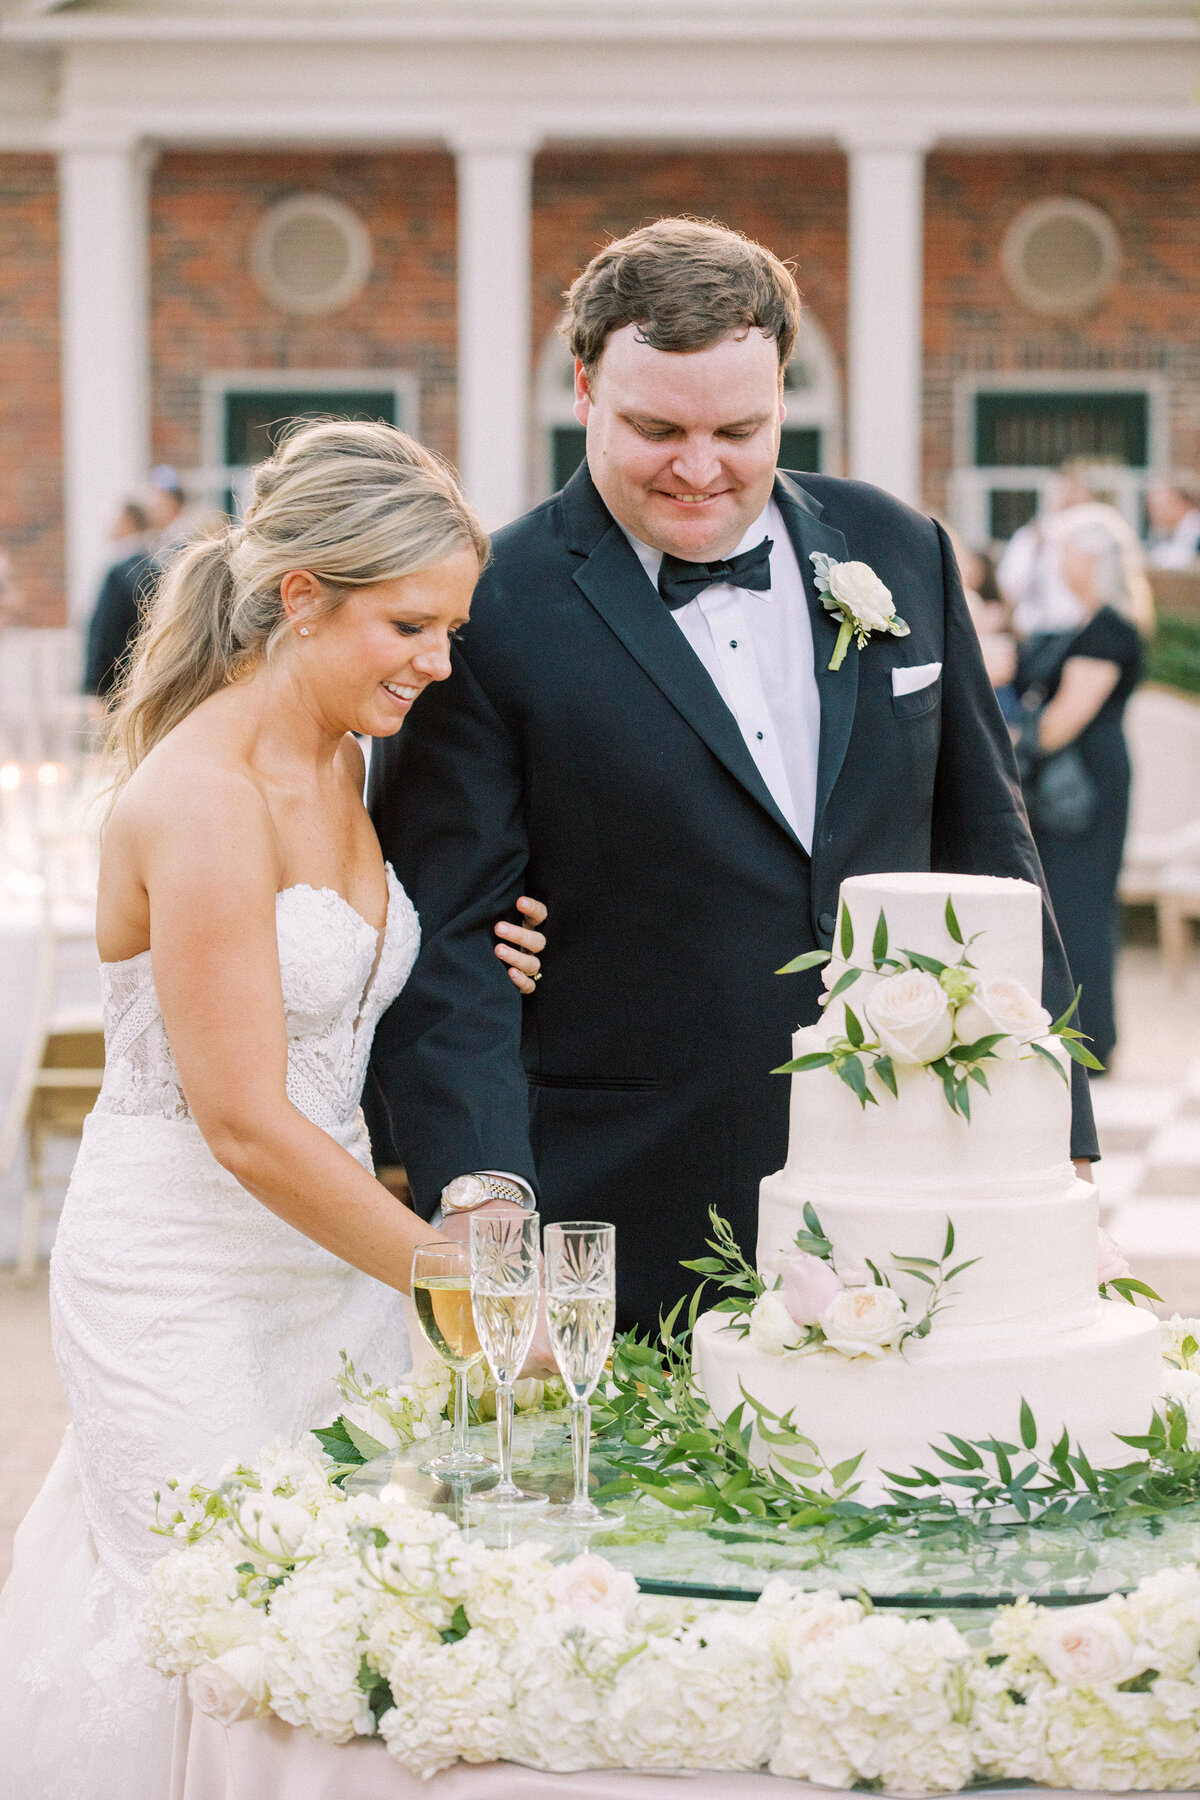 A wedding at Pebble Hill in Thomasville GA - 31